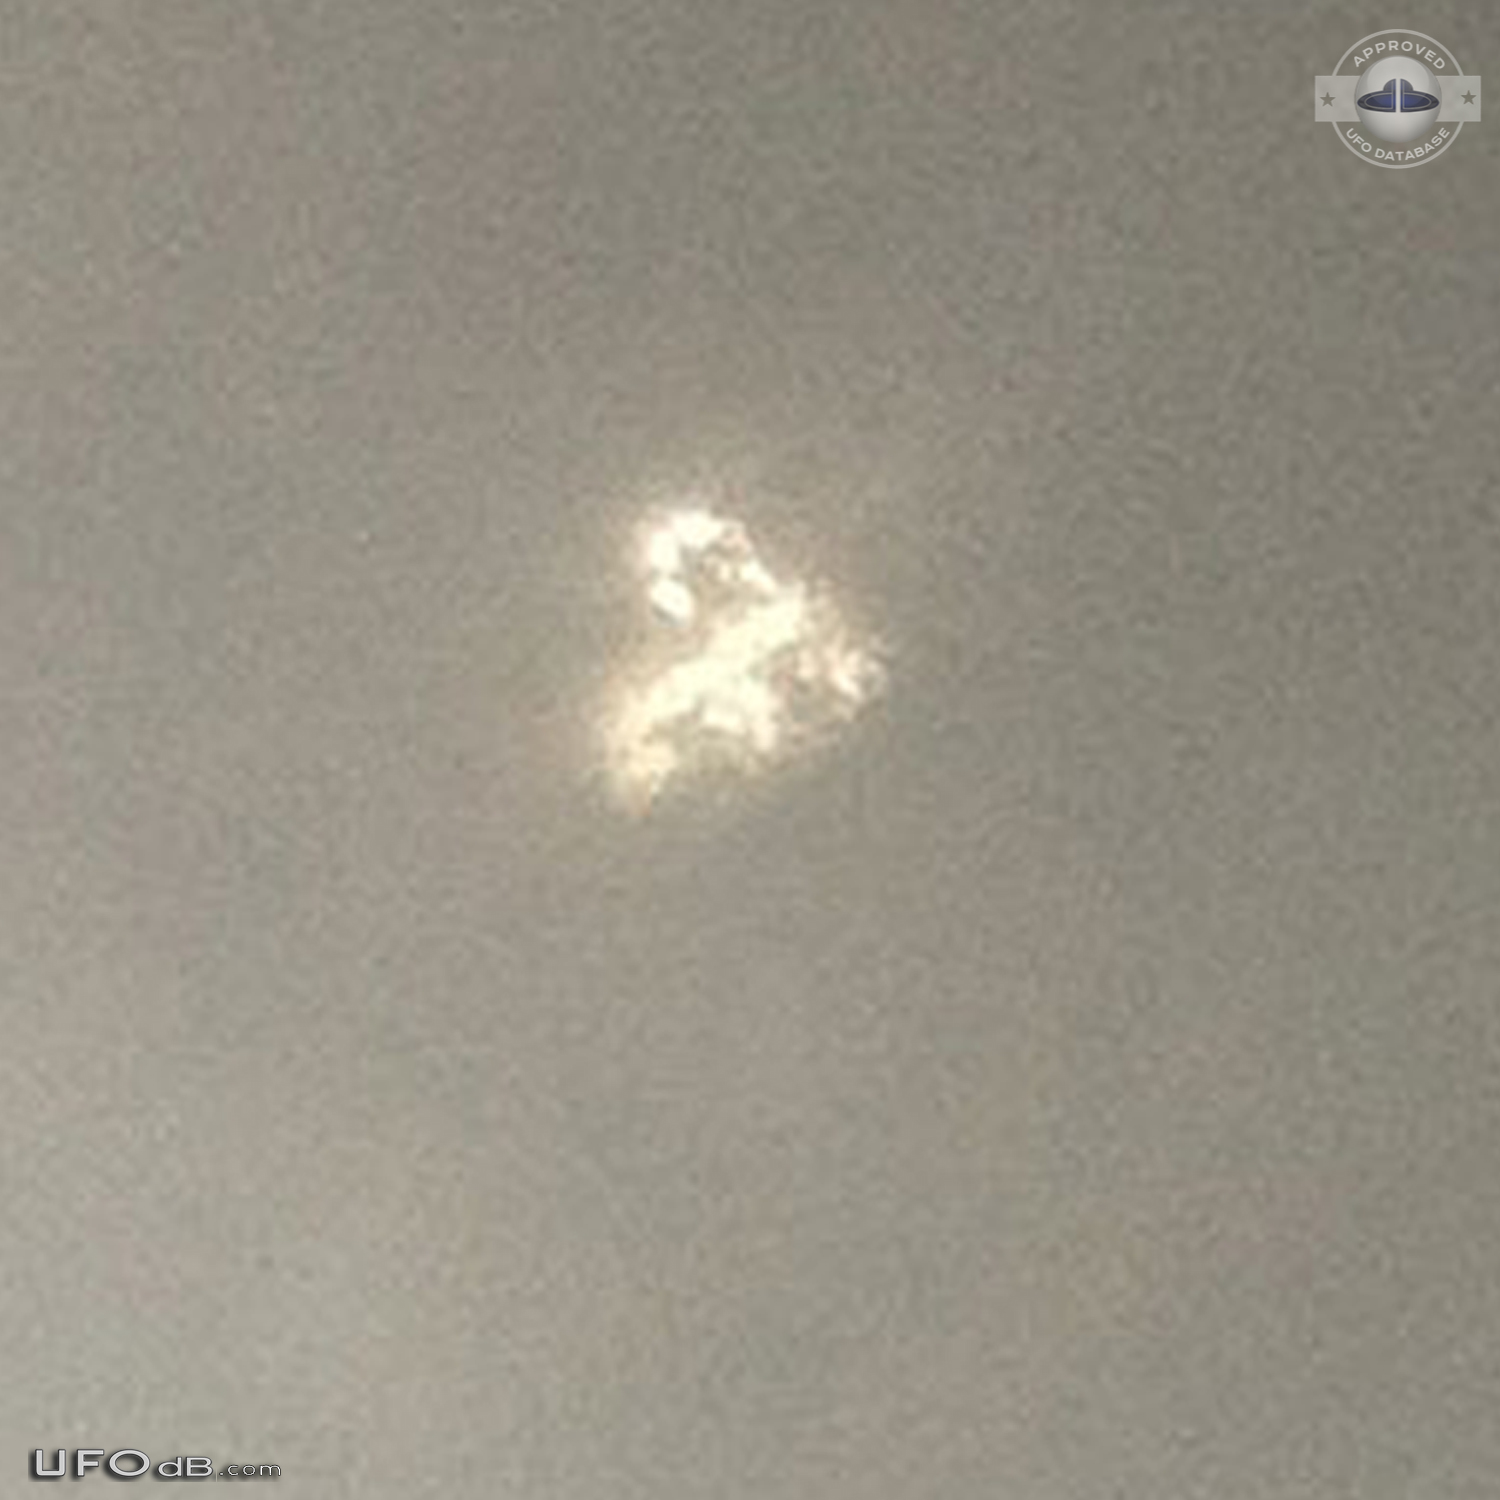 UFO appeared, disappeared and appeared again in Los Angeles CA 2015 UFO Picture #651-4